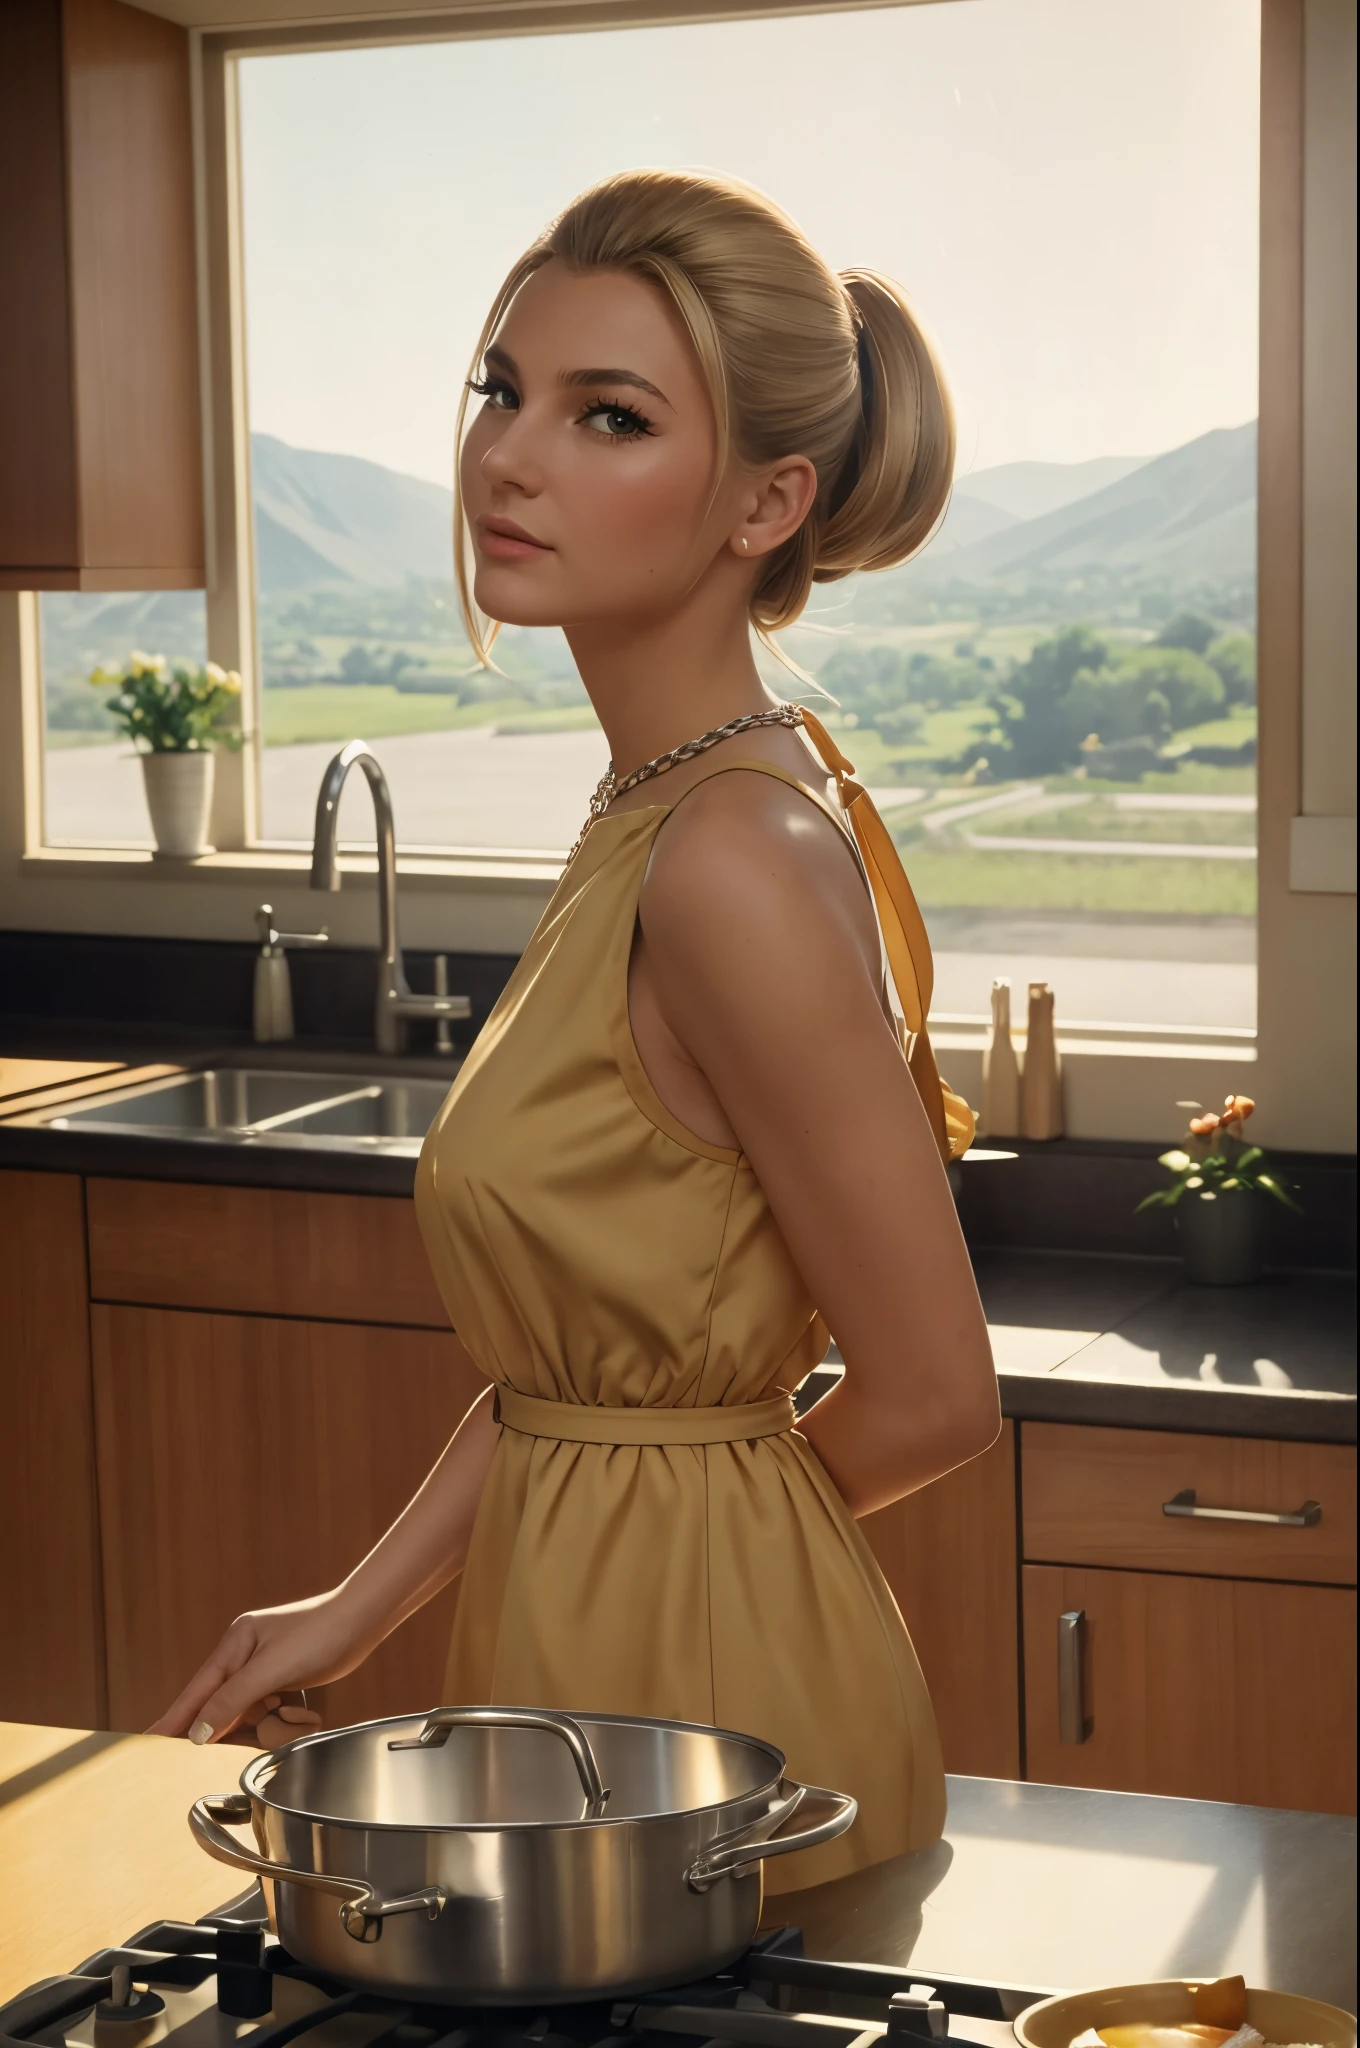 Low angle shot, an athletic honey blonde, wearing a vintage 1960s minidress and chain belt, SixtiesHighFashion, 1960s hairstyle, medium breasts, not exposed, cooking, food pots on a stove in a sunny ((1960s kitchen)), looking away from viewer, beautiful view out the windows, 8 k sensual lighting, warm lighting, 4k extremely photorealistic, cgsociety uhd 4k highly detailed, trending on cgstation